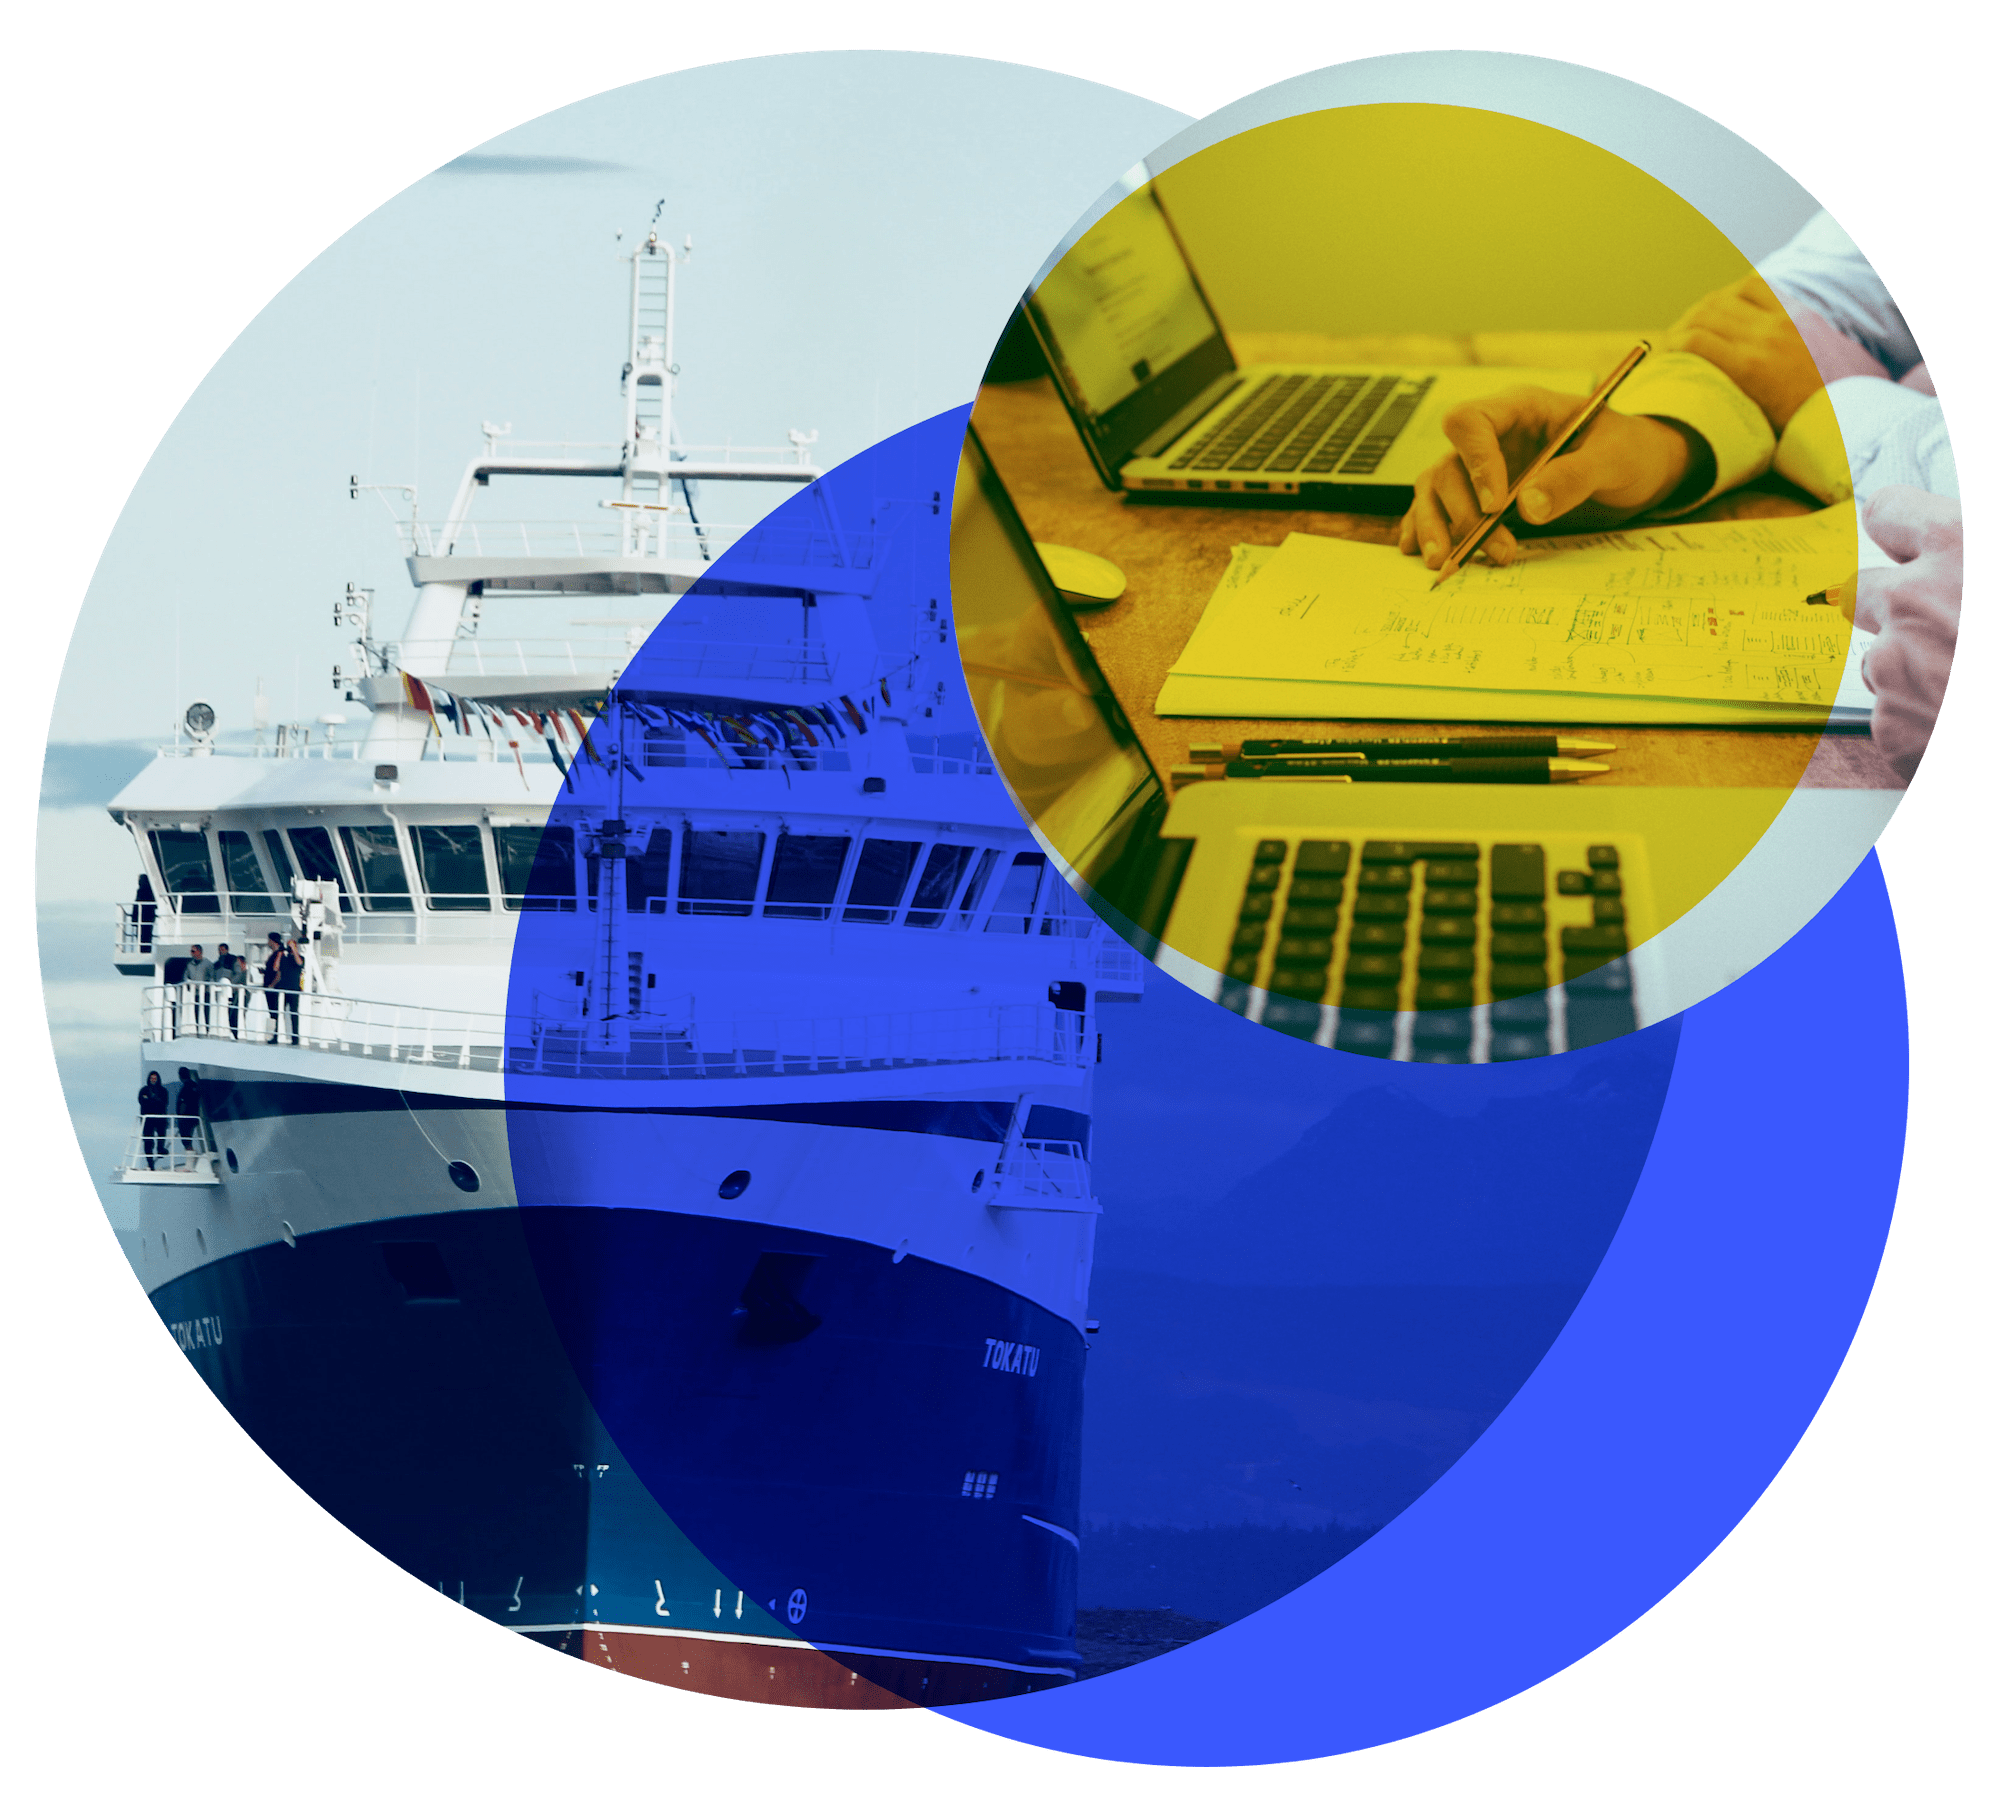 A circular image of a ship with an inset icon of people using laptops